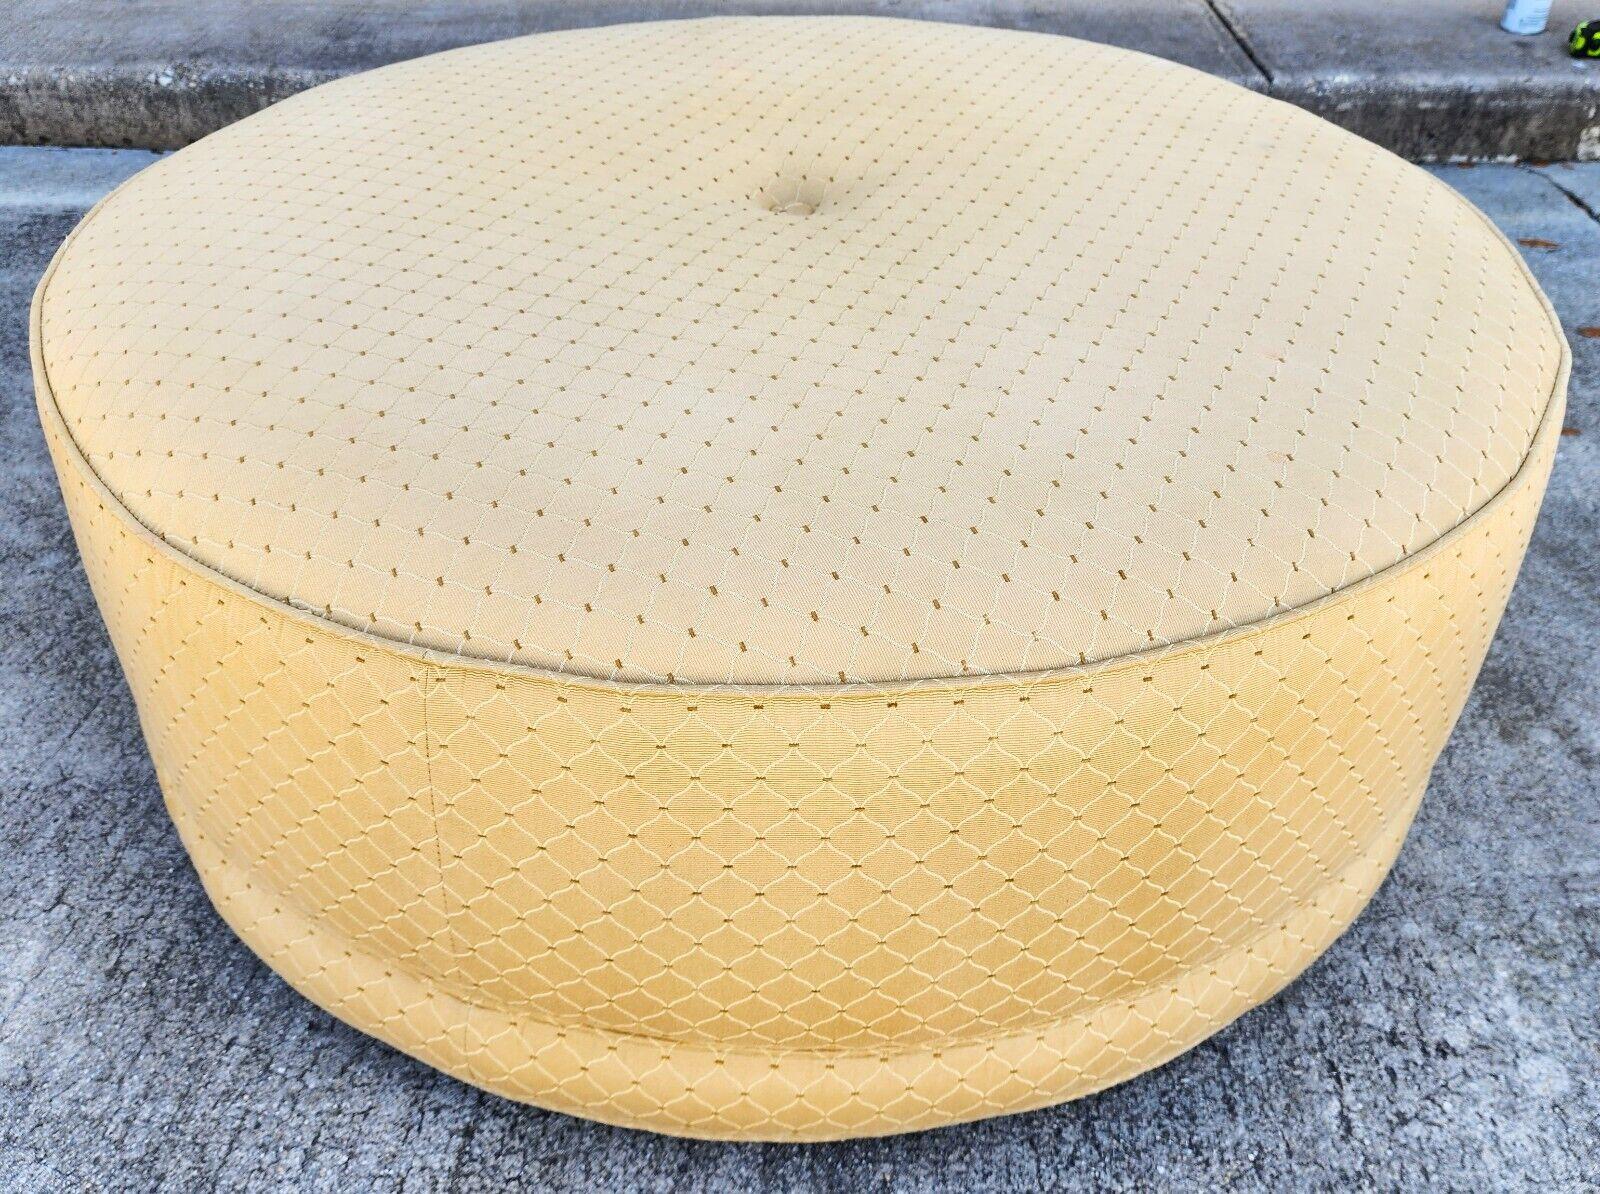 For FULL item description click on CONTINUE READING at the bottom of this page.

Offering One Of Our Recent Palm Beach Estate Fine Furniture Acquisitions Of An 
Oversized Designer Full Swivel Ottoman 
This is a very large, well-made and heavy